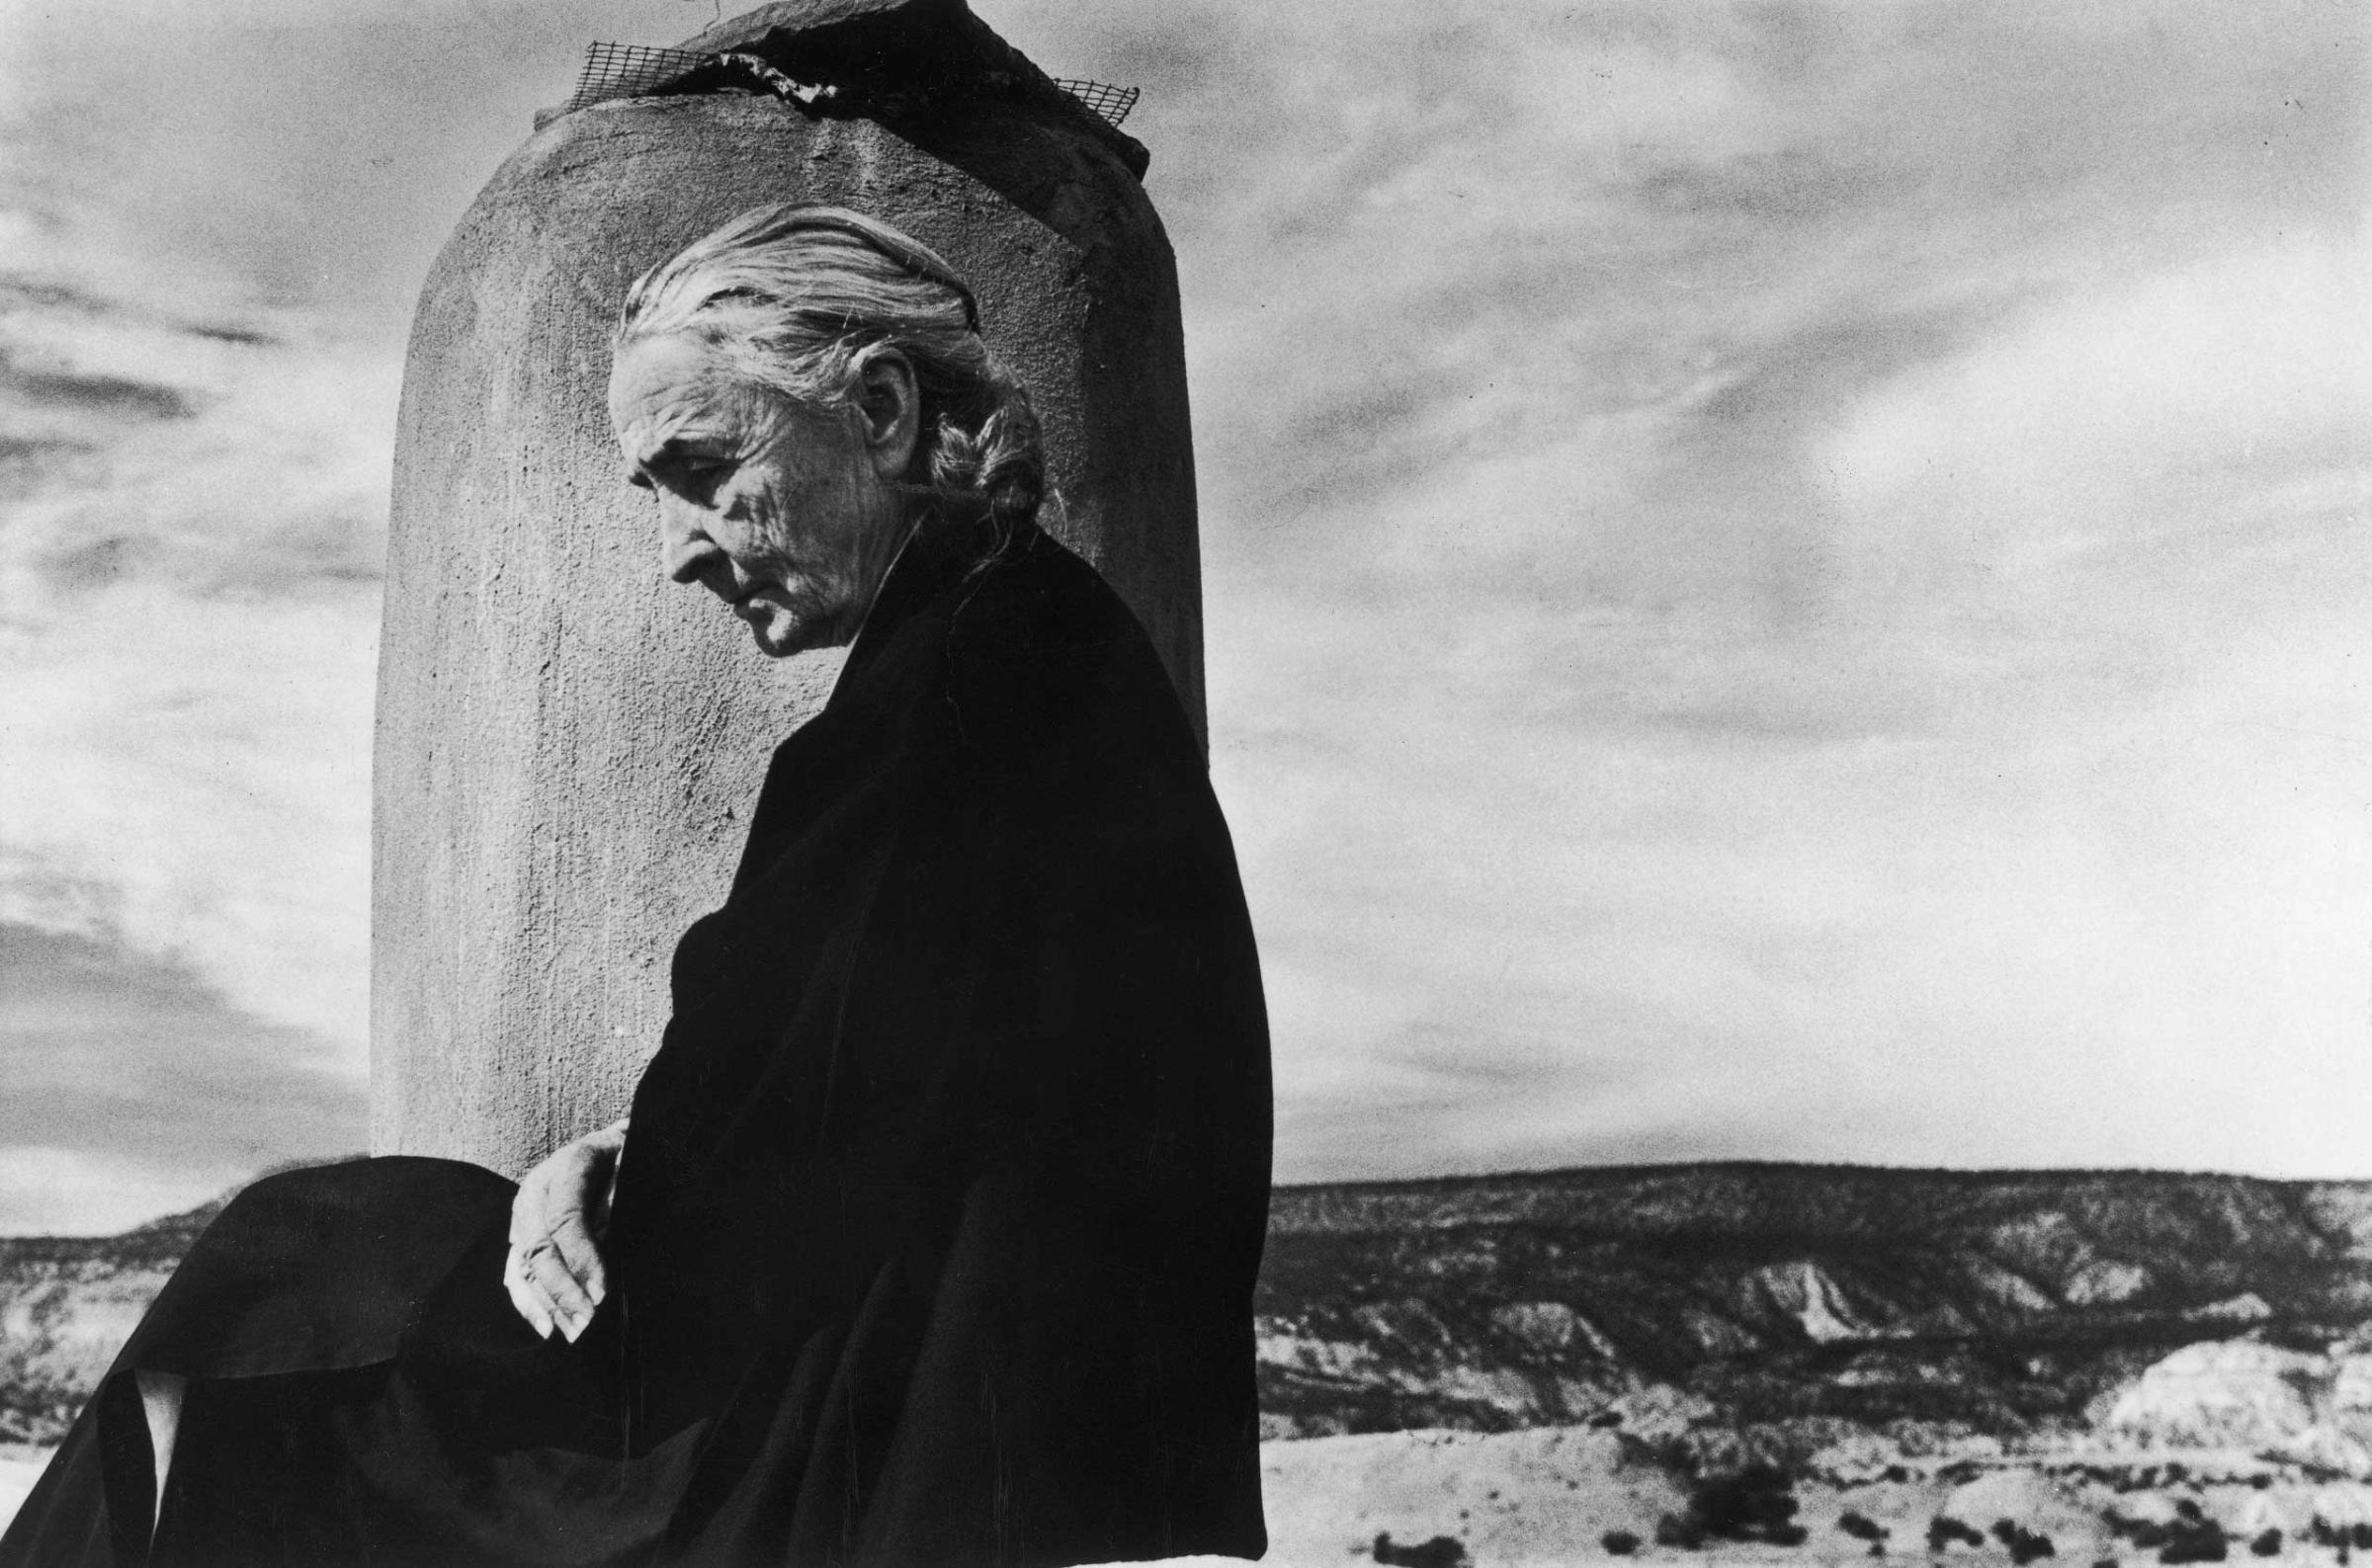 Georgia O'Keeffe photographed on the roof of her Ghost Ranch home in New Mexico, 1967.